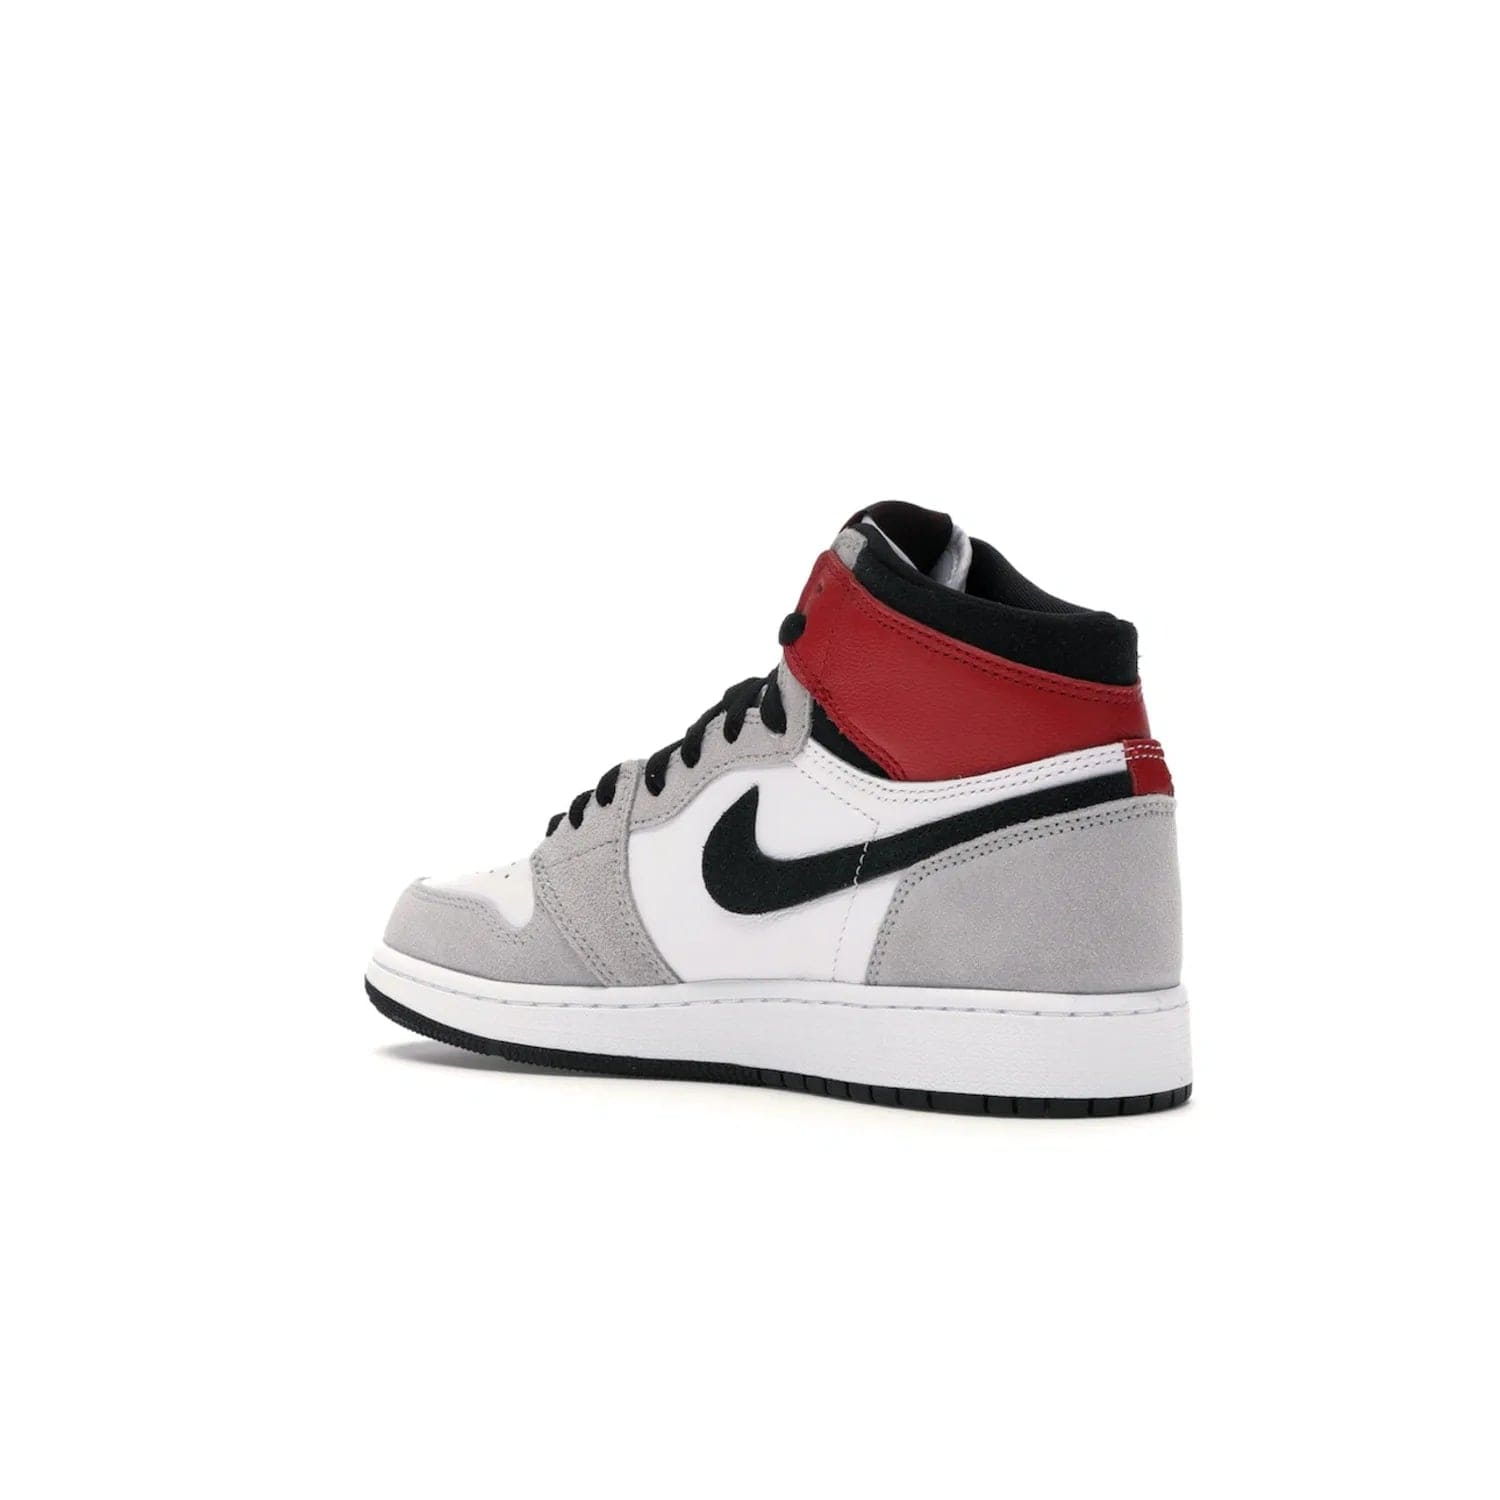 Jordan 1 Retro High Light Smoke Grey (GS) - Image 23 - Only at www.BallersClubKickz.com - Jordan 1 Retro High Light Smoke Grey (GS) features shades of grey, black, and Varsity Red with a bold silhouette. Premium white leather and suede overlays create a unique look. Released July 2020, offering style and performance. Perfect sneaker for any collector or fan.